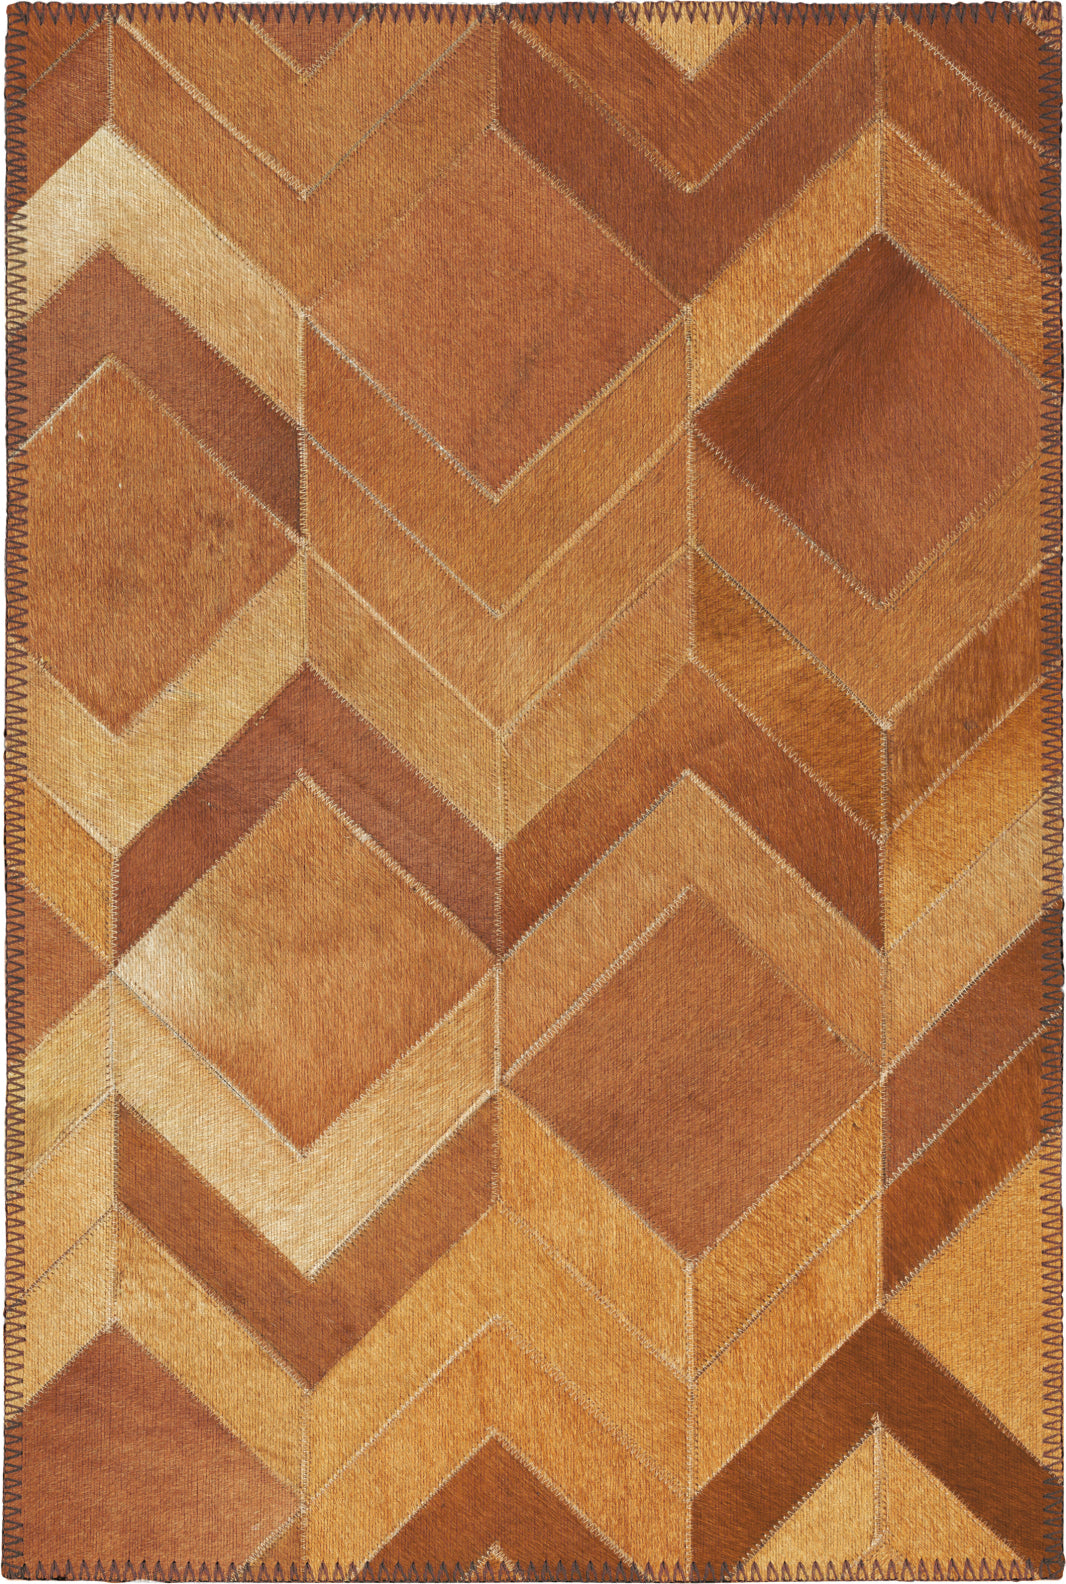 Dalyn Stetson SS5 Spice Area Rug main image